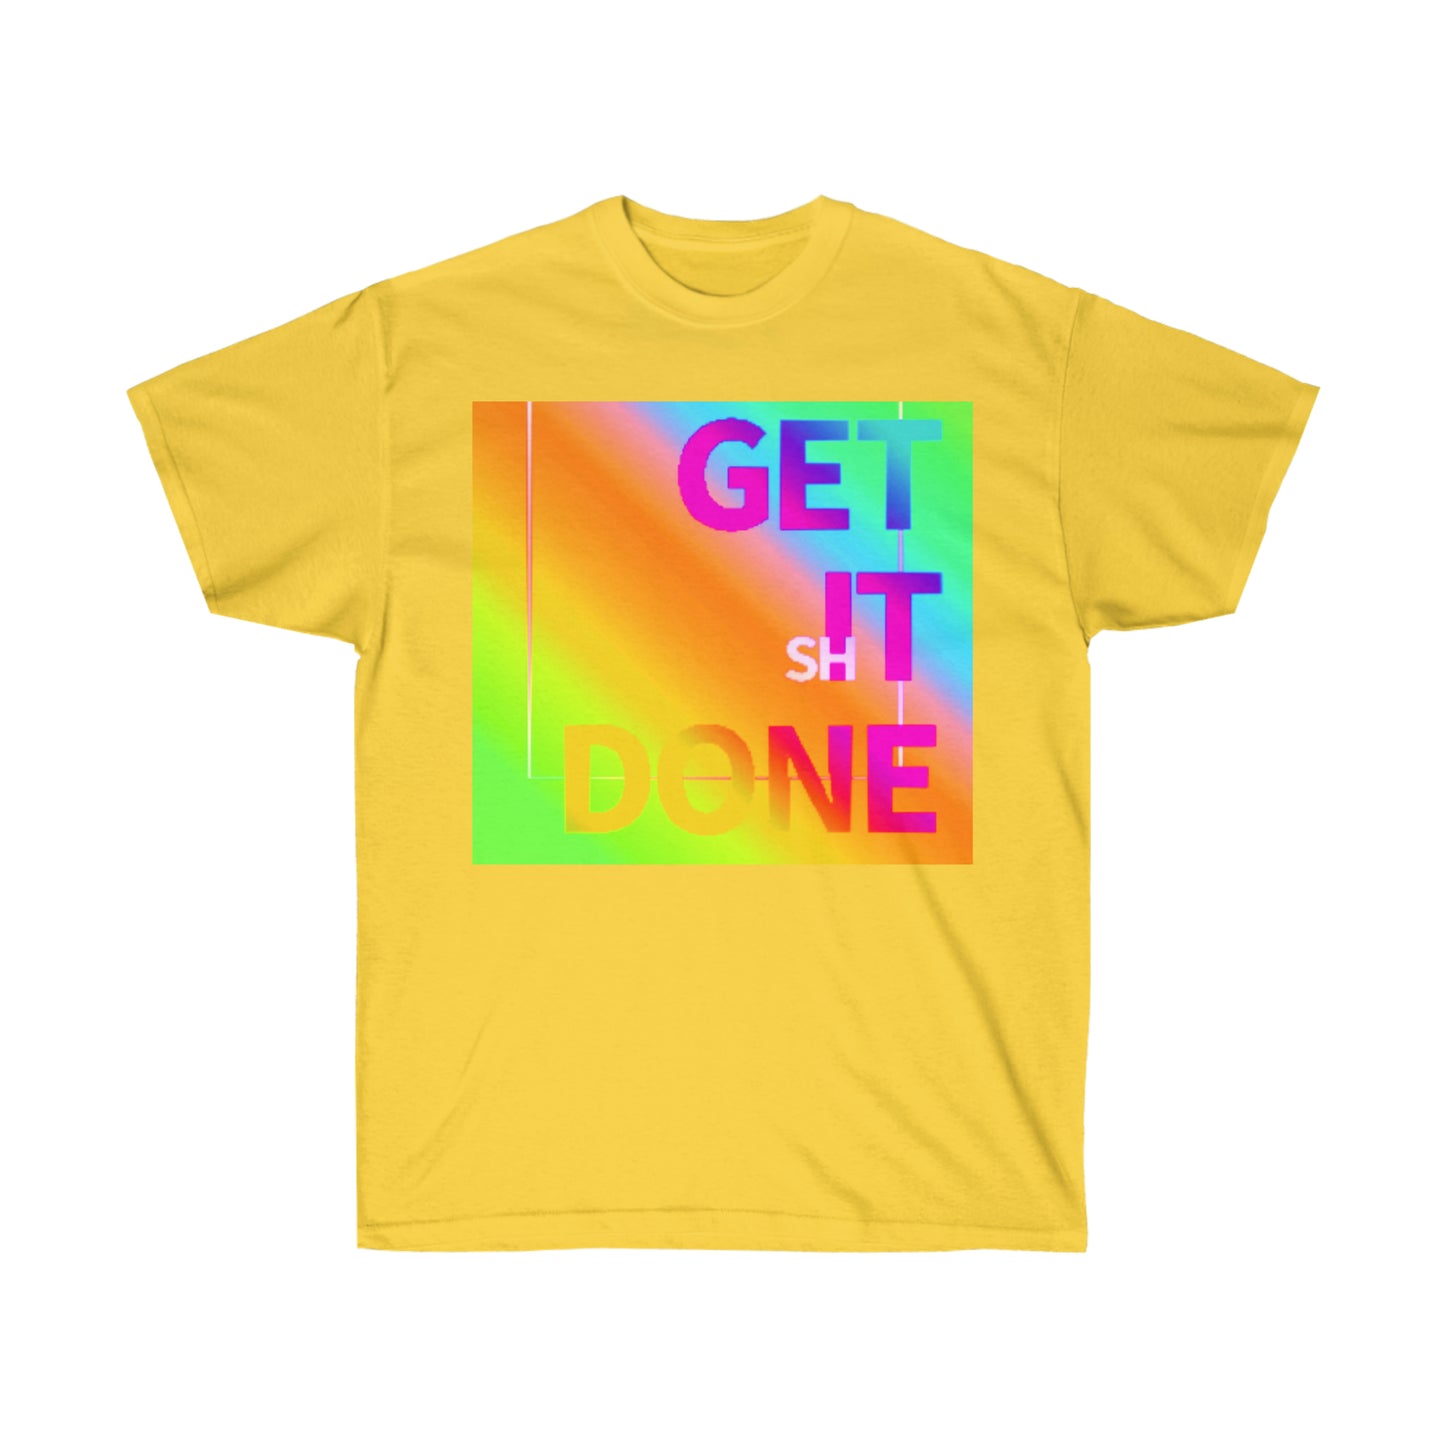 Get it done! - Unisex Ultra Cotton Tee